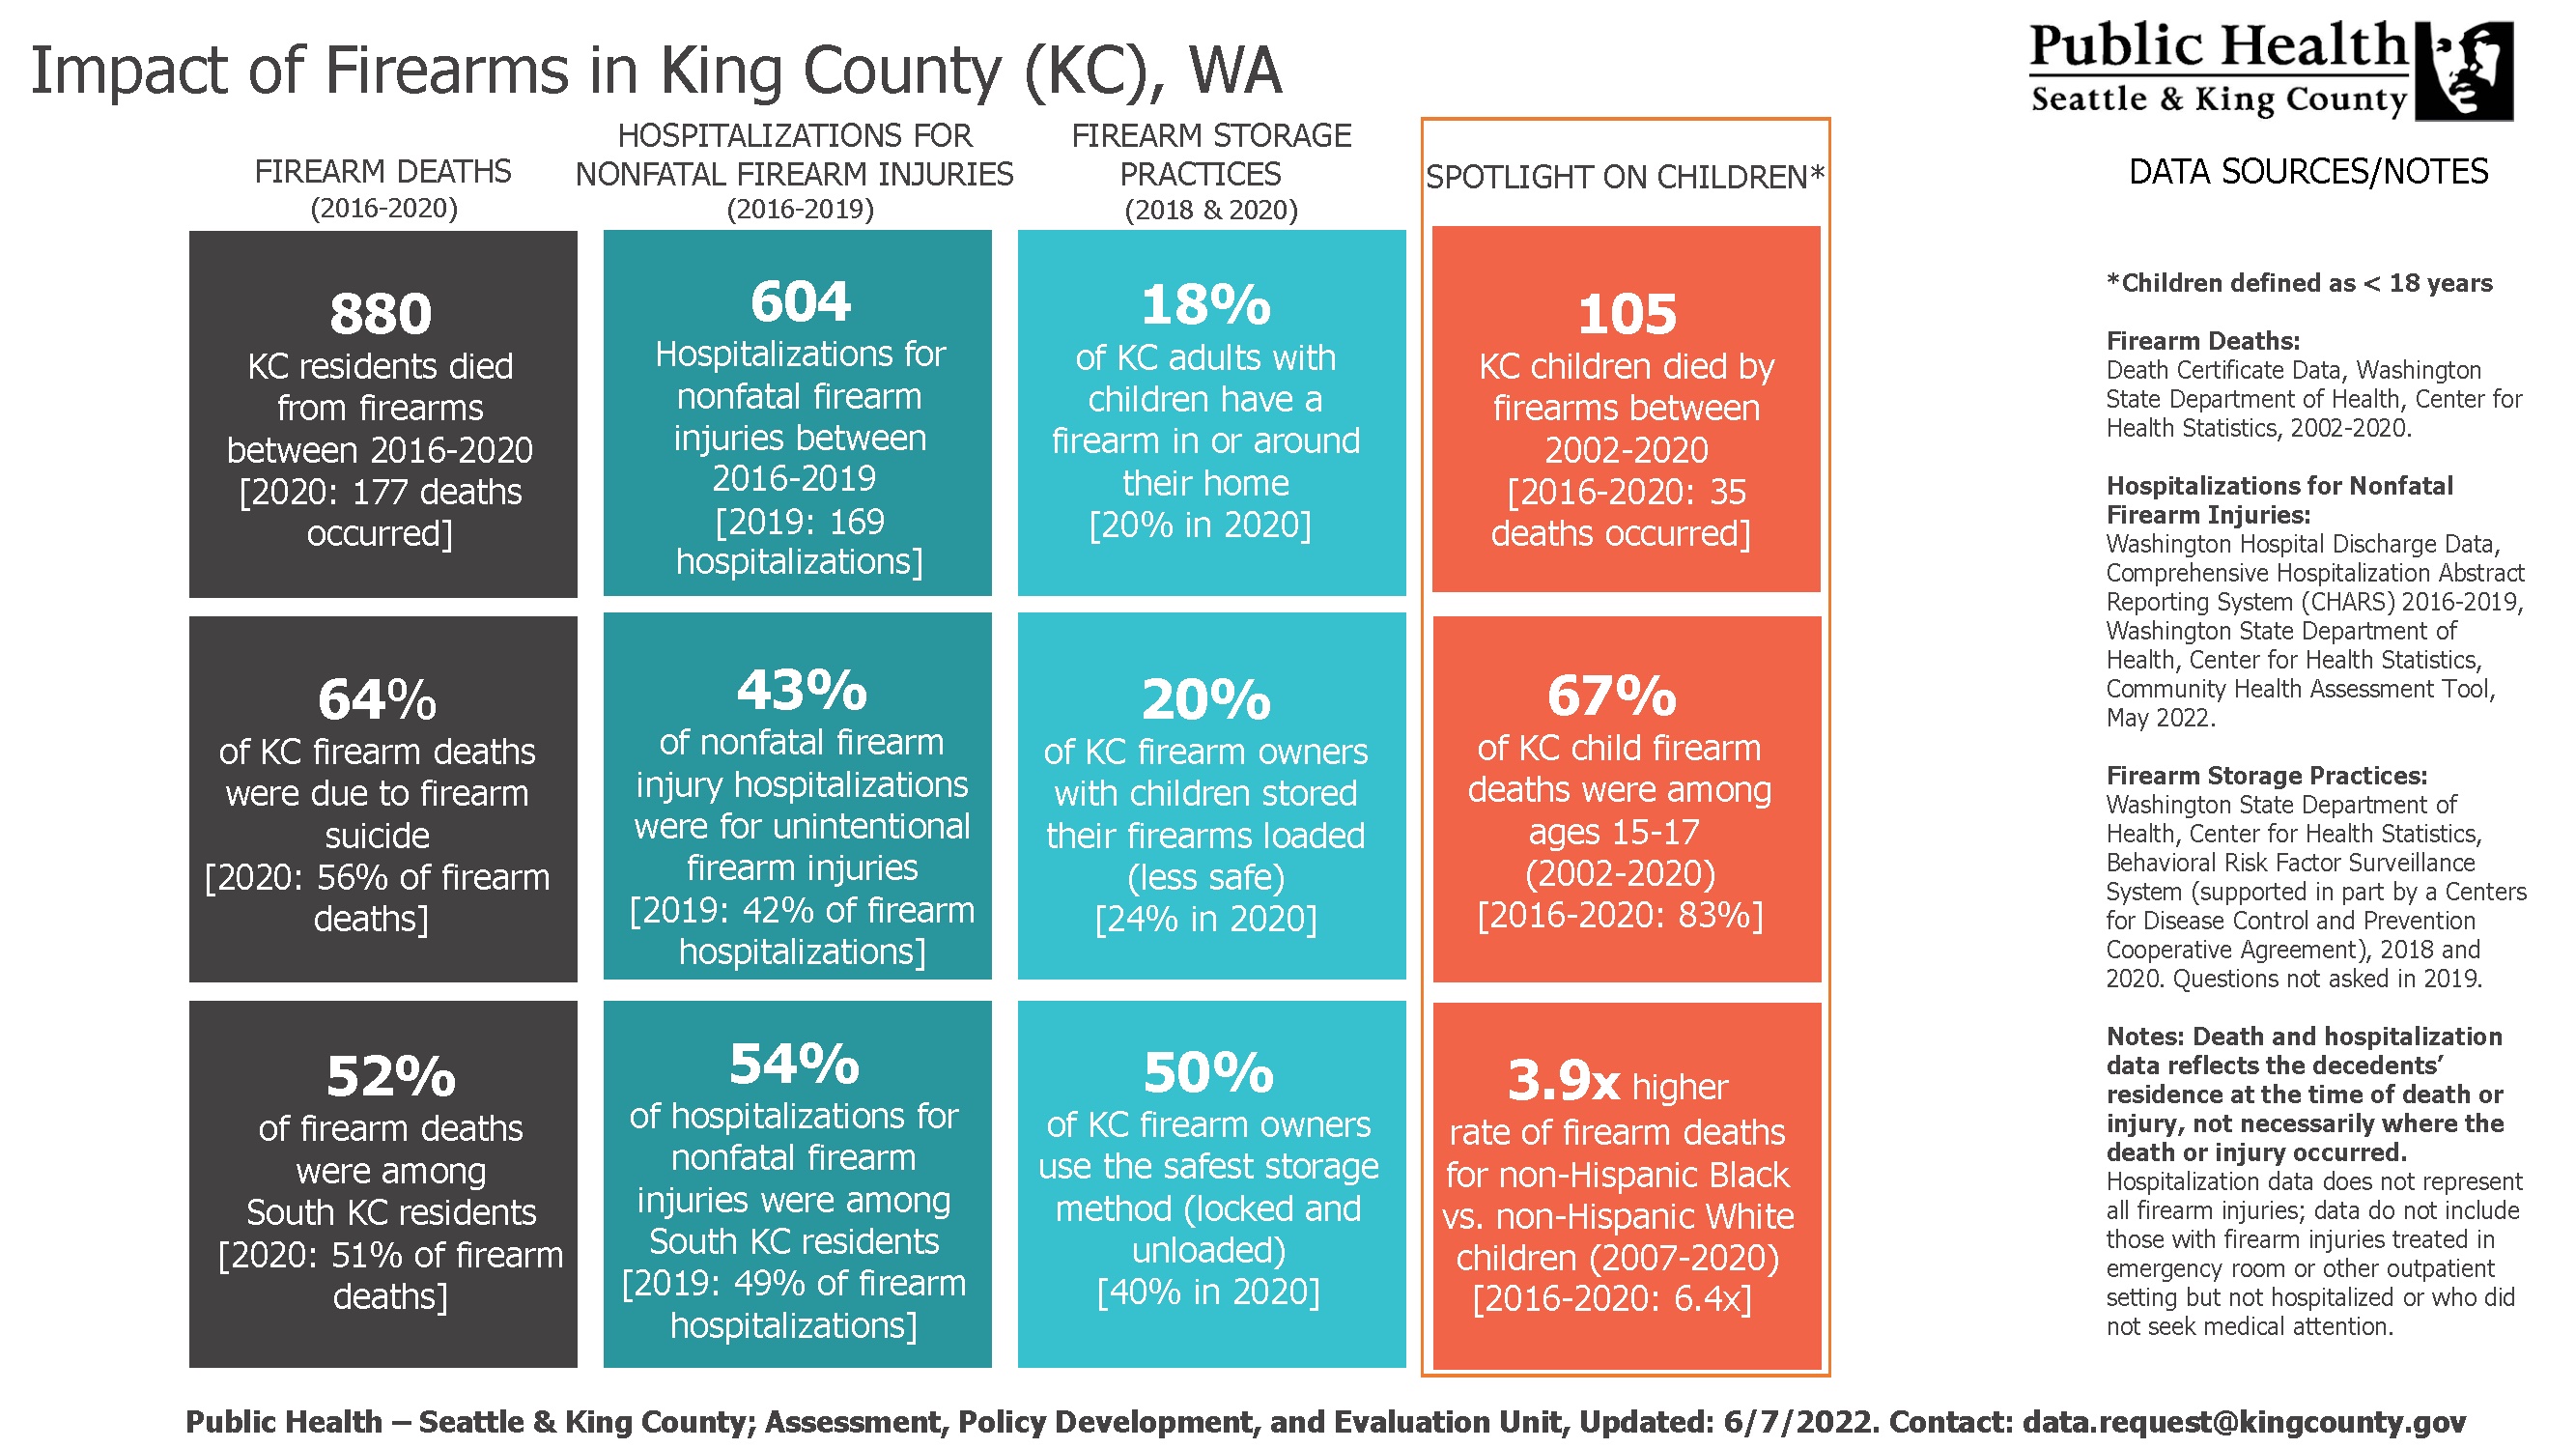 The impact of firearms in King County